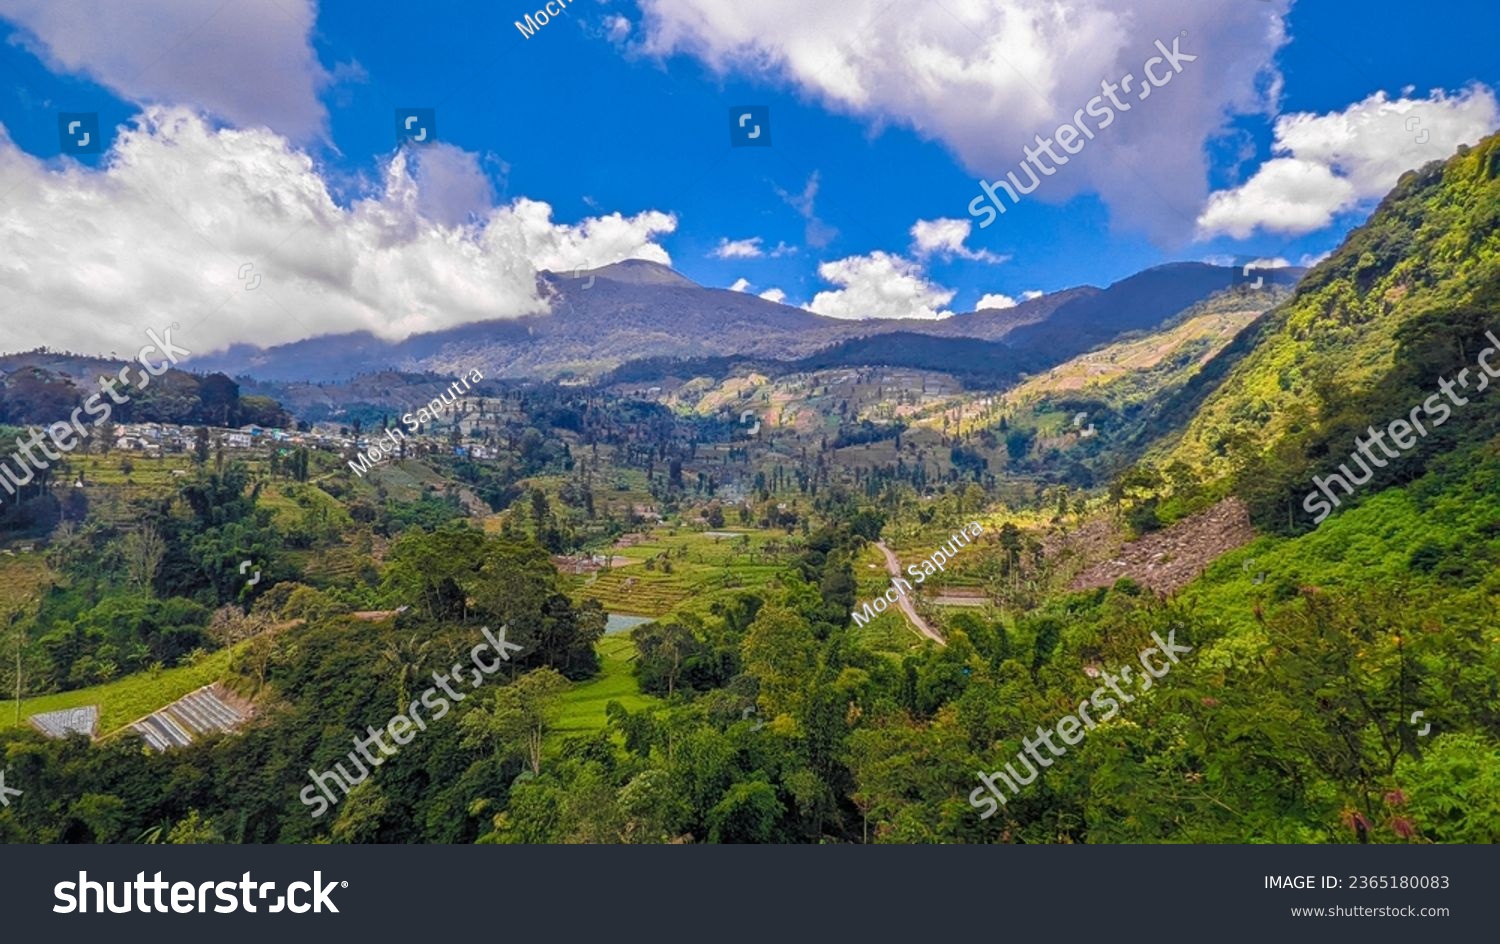 This is a photo of Mount Ciremai.
Mount Ciremai, also known as Mount Ceremai, is one of the prominent volcanoes on the island of Java, Indonesia.
Located in West Java Province. #2365180083